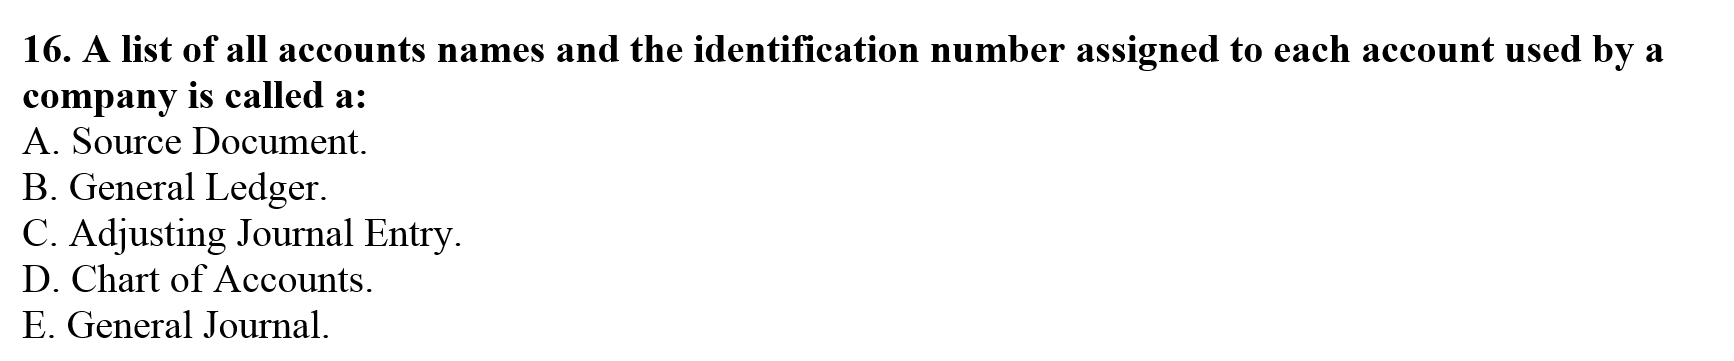 what is an assigned identification number